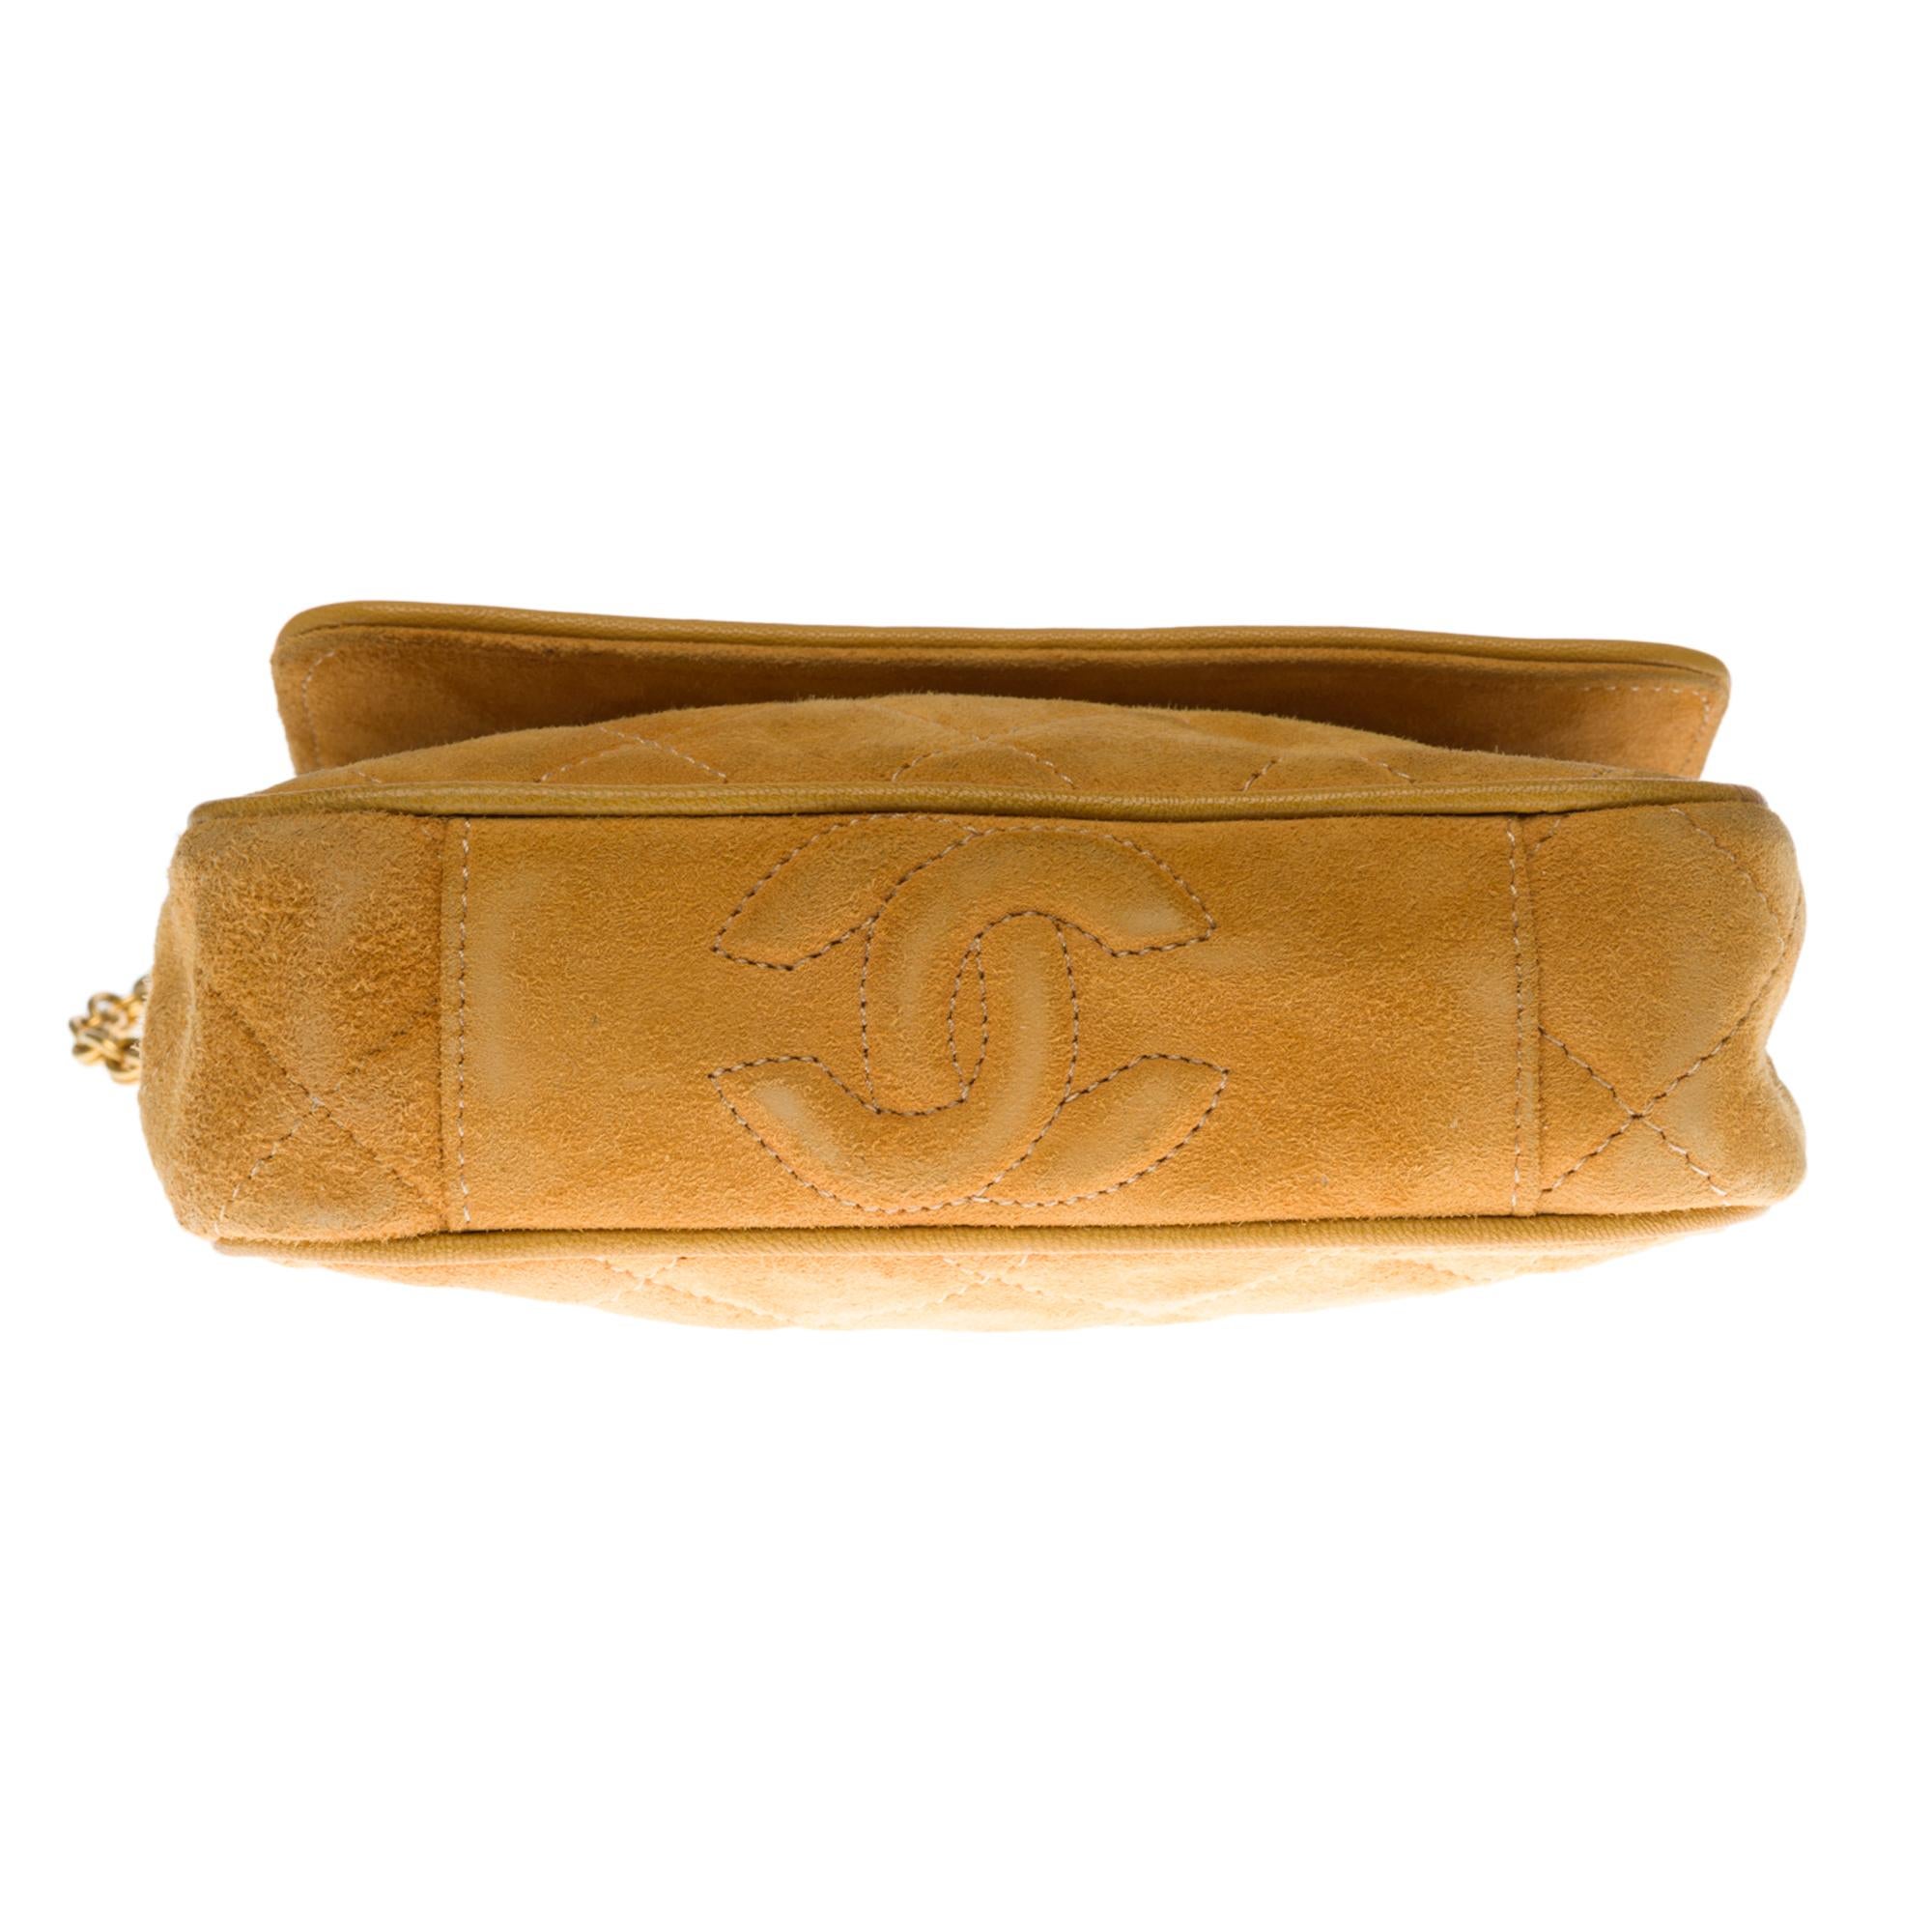 Chanel Classic Mini Shoulder Bag in beige quilted suede, GHW 2